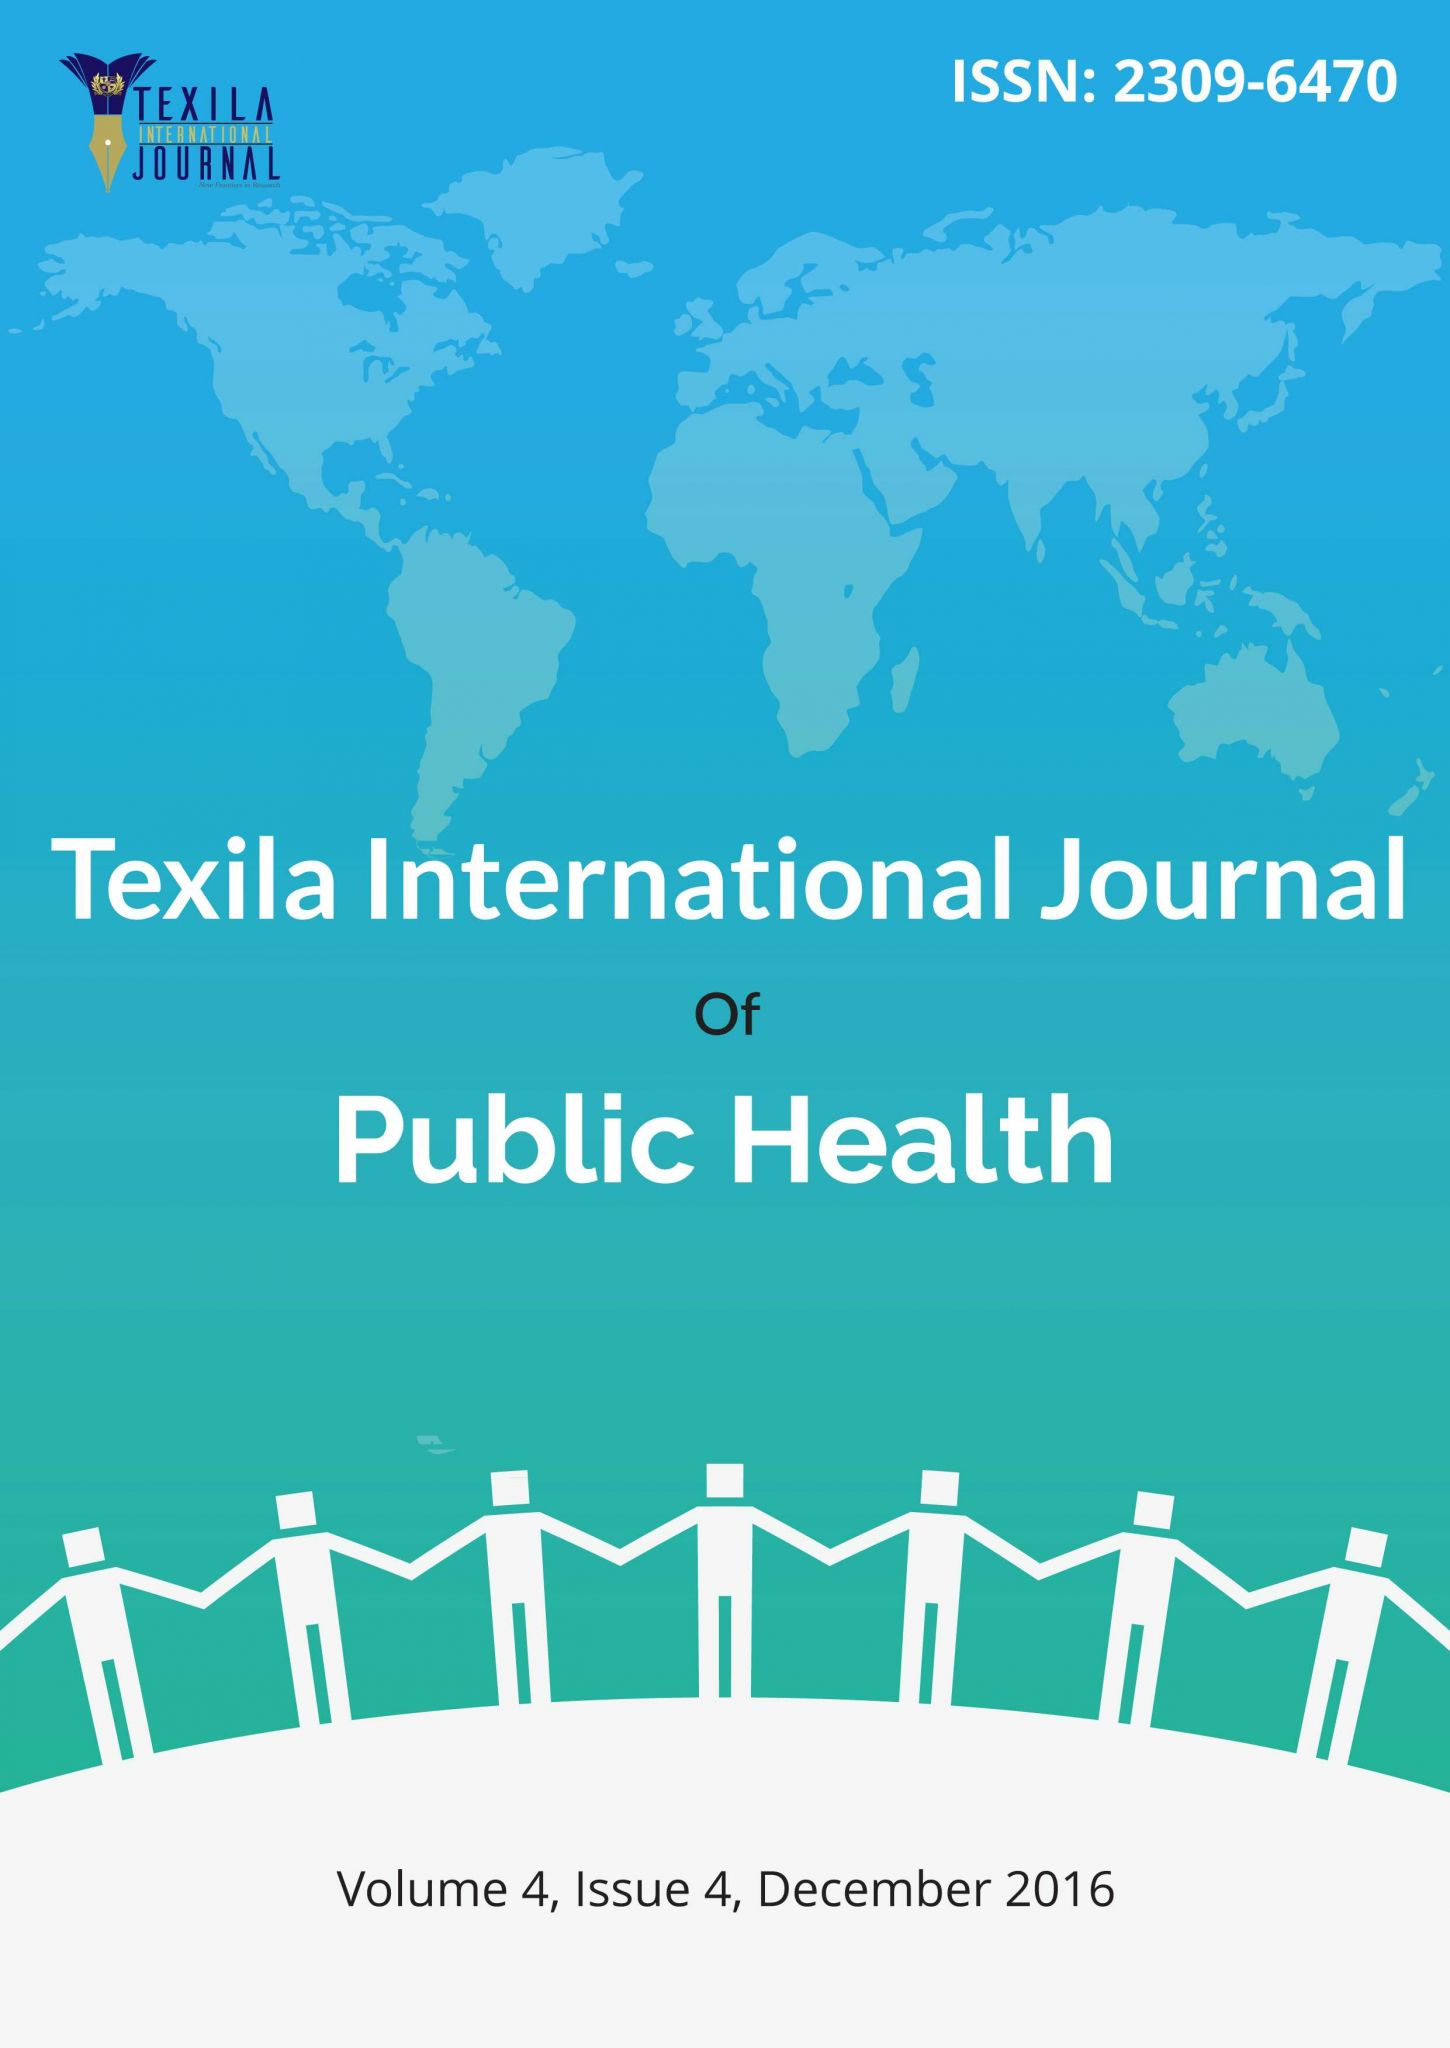 America the Story Of Us Millennium Worksheet Answers with International Journal Of Public Health